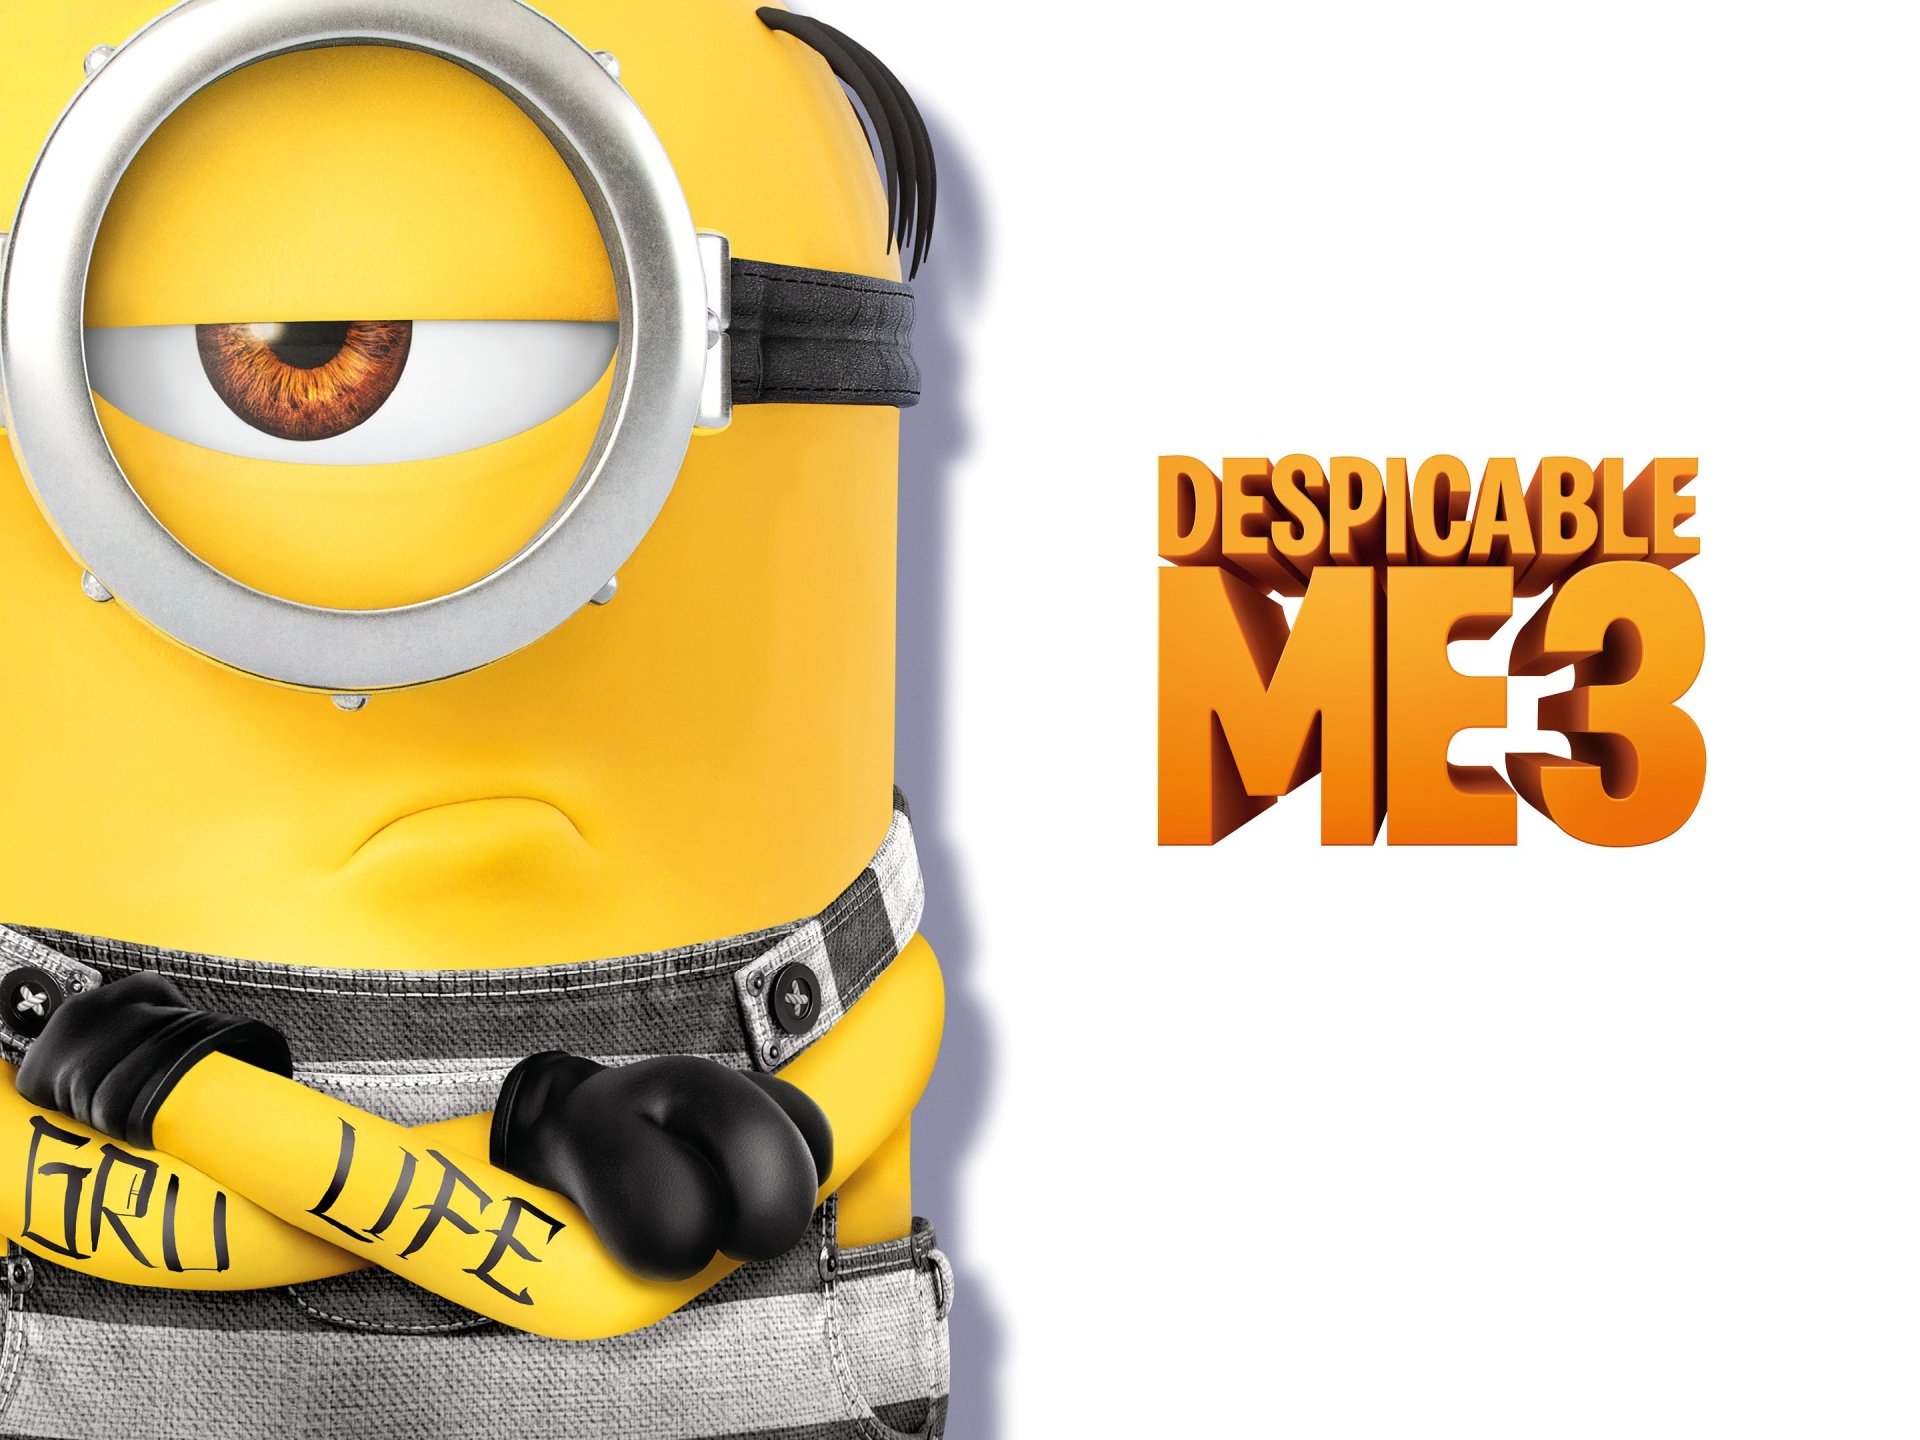 Despicable Me 3 download the new version for ios